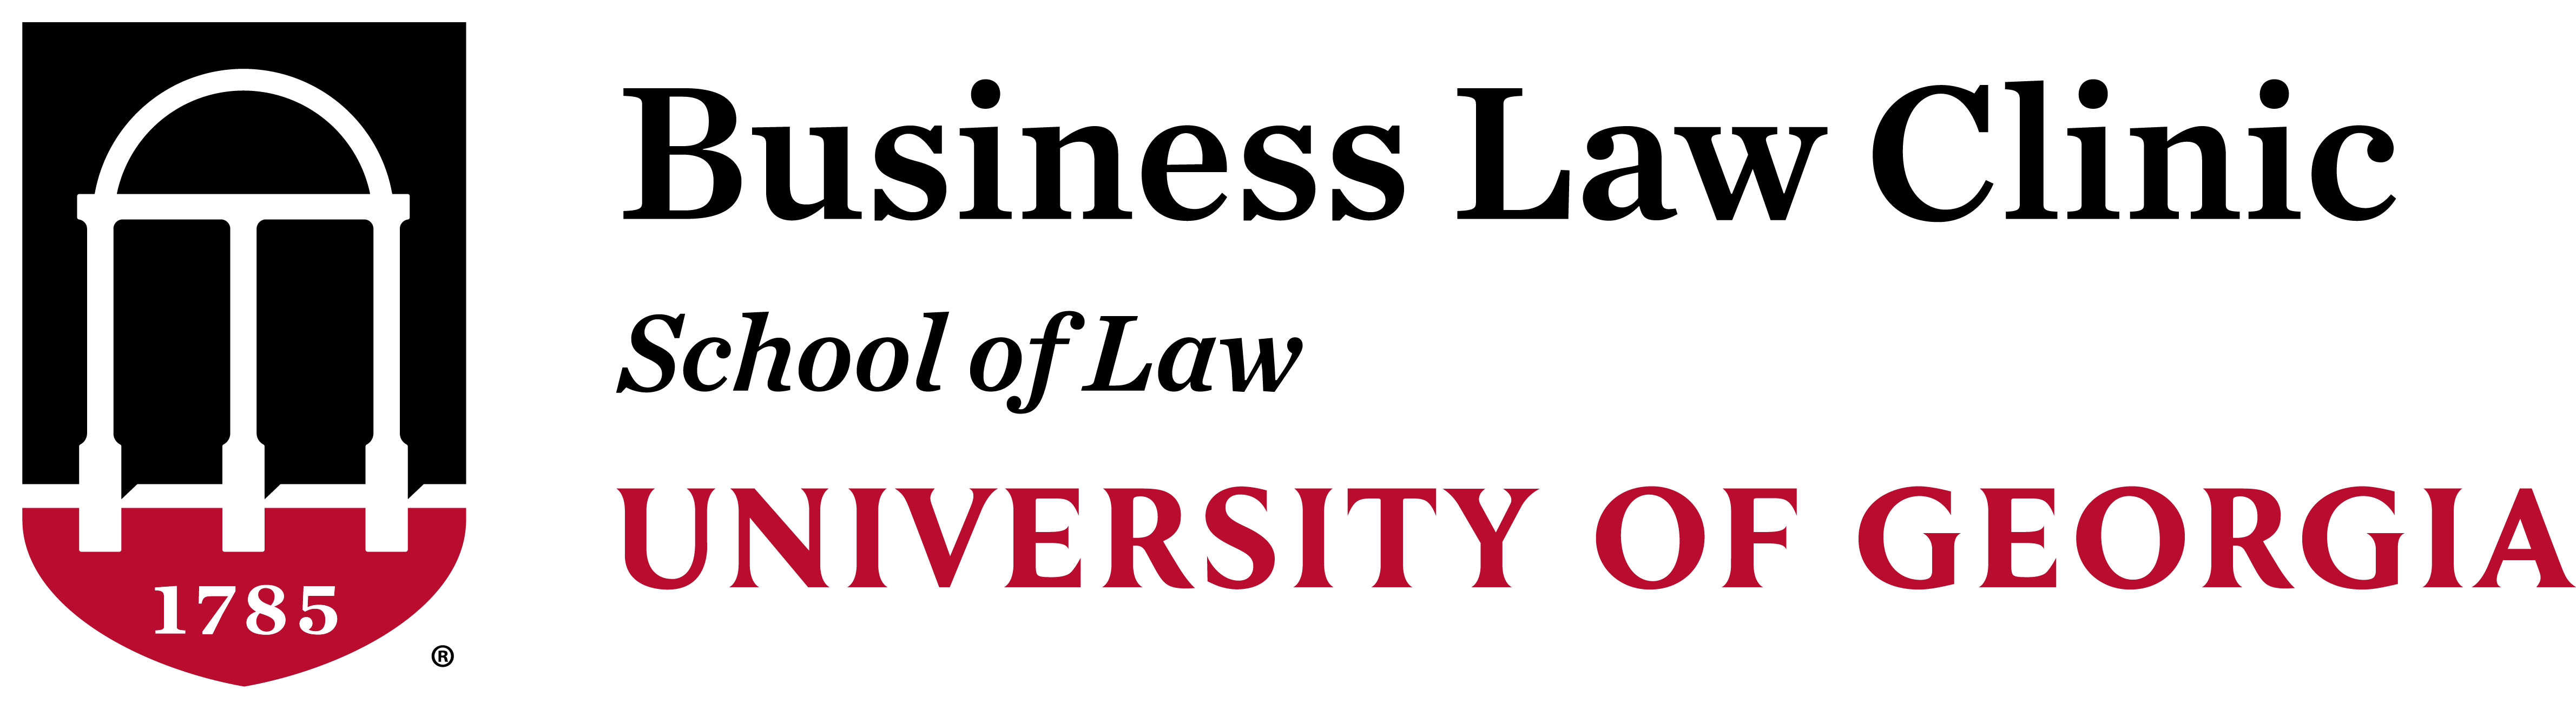 Business Law Clinic